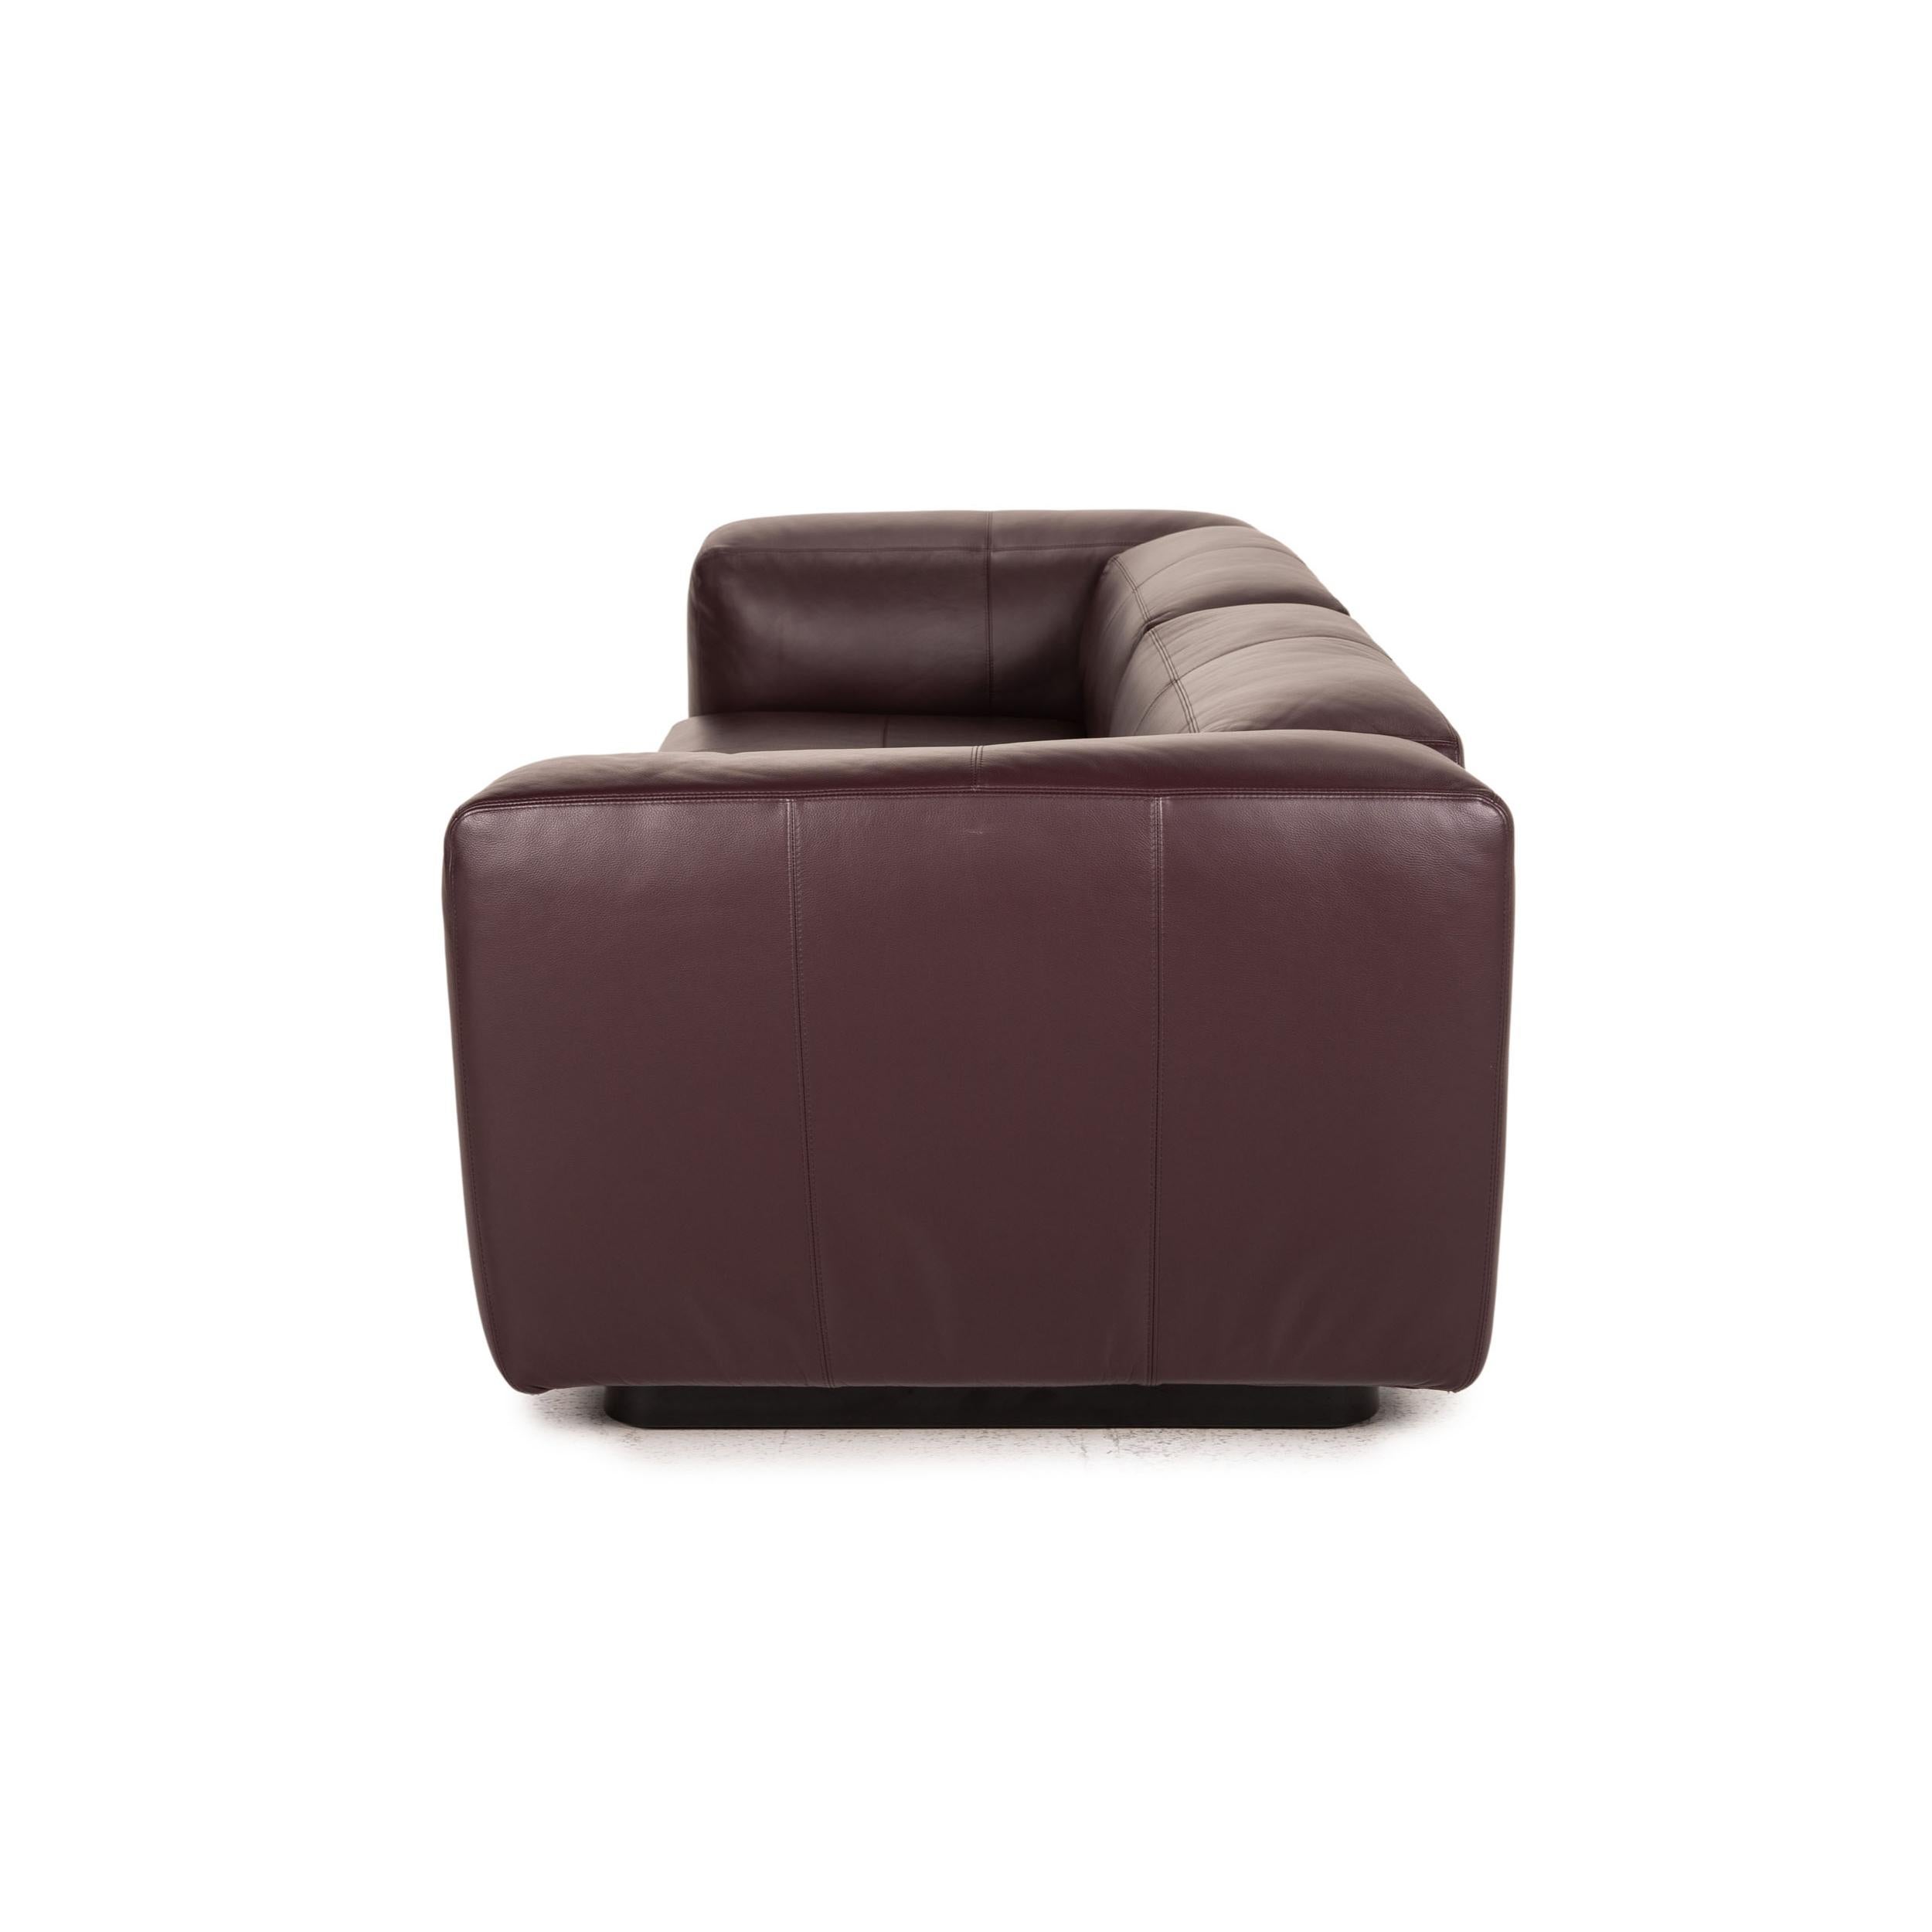 Vitra Soft Modular Leather Sofa Purple Two-Seater Couch In Good Condition For Sale In Cologne, DE